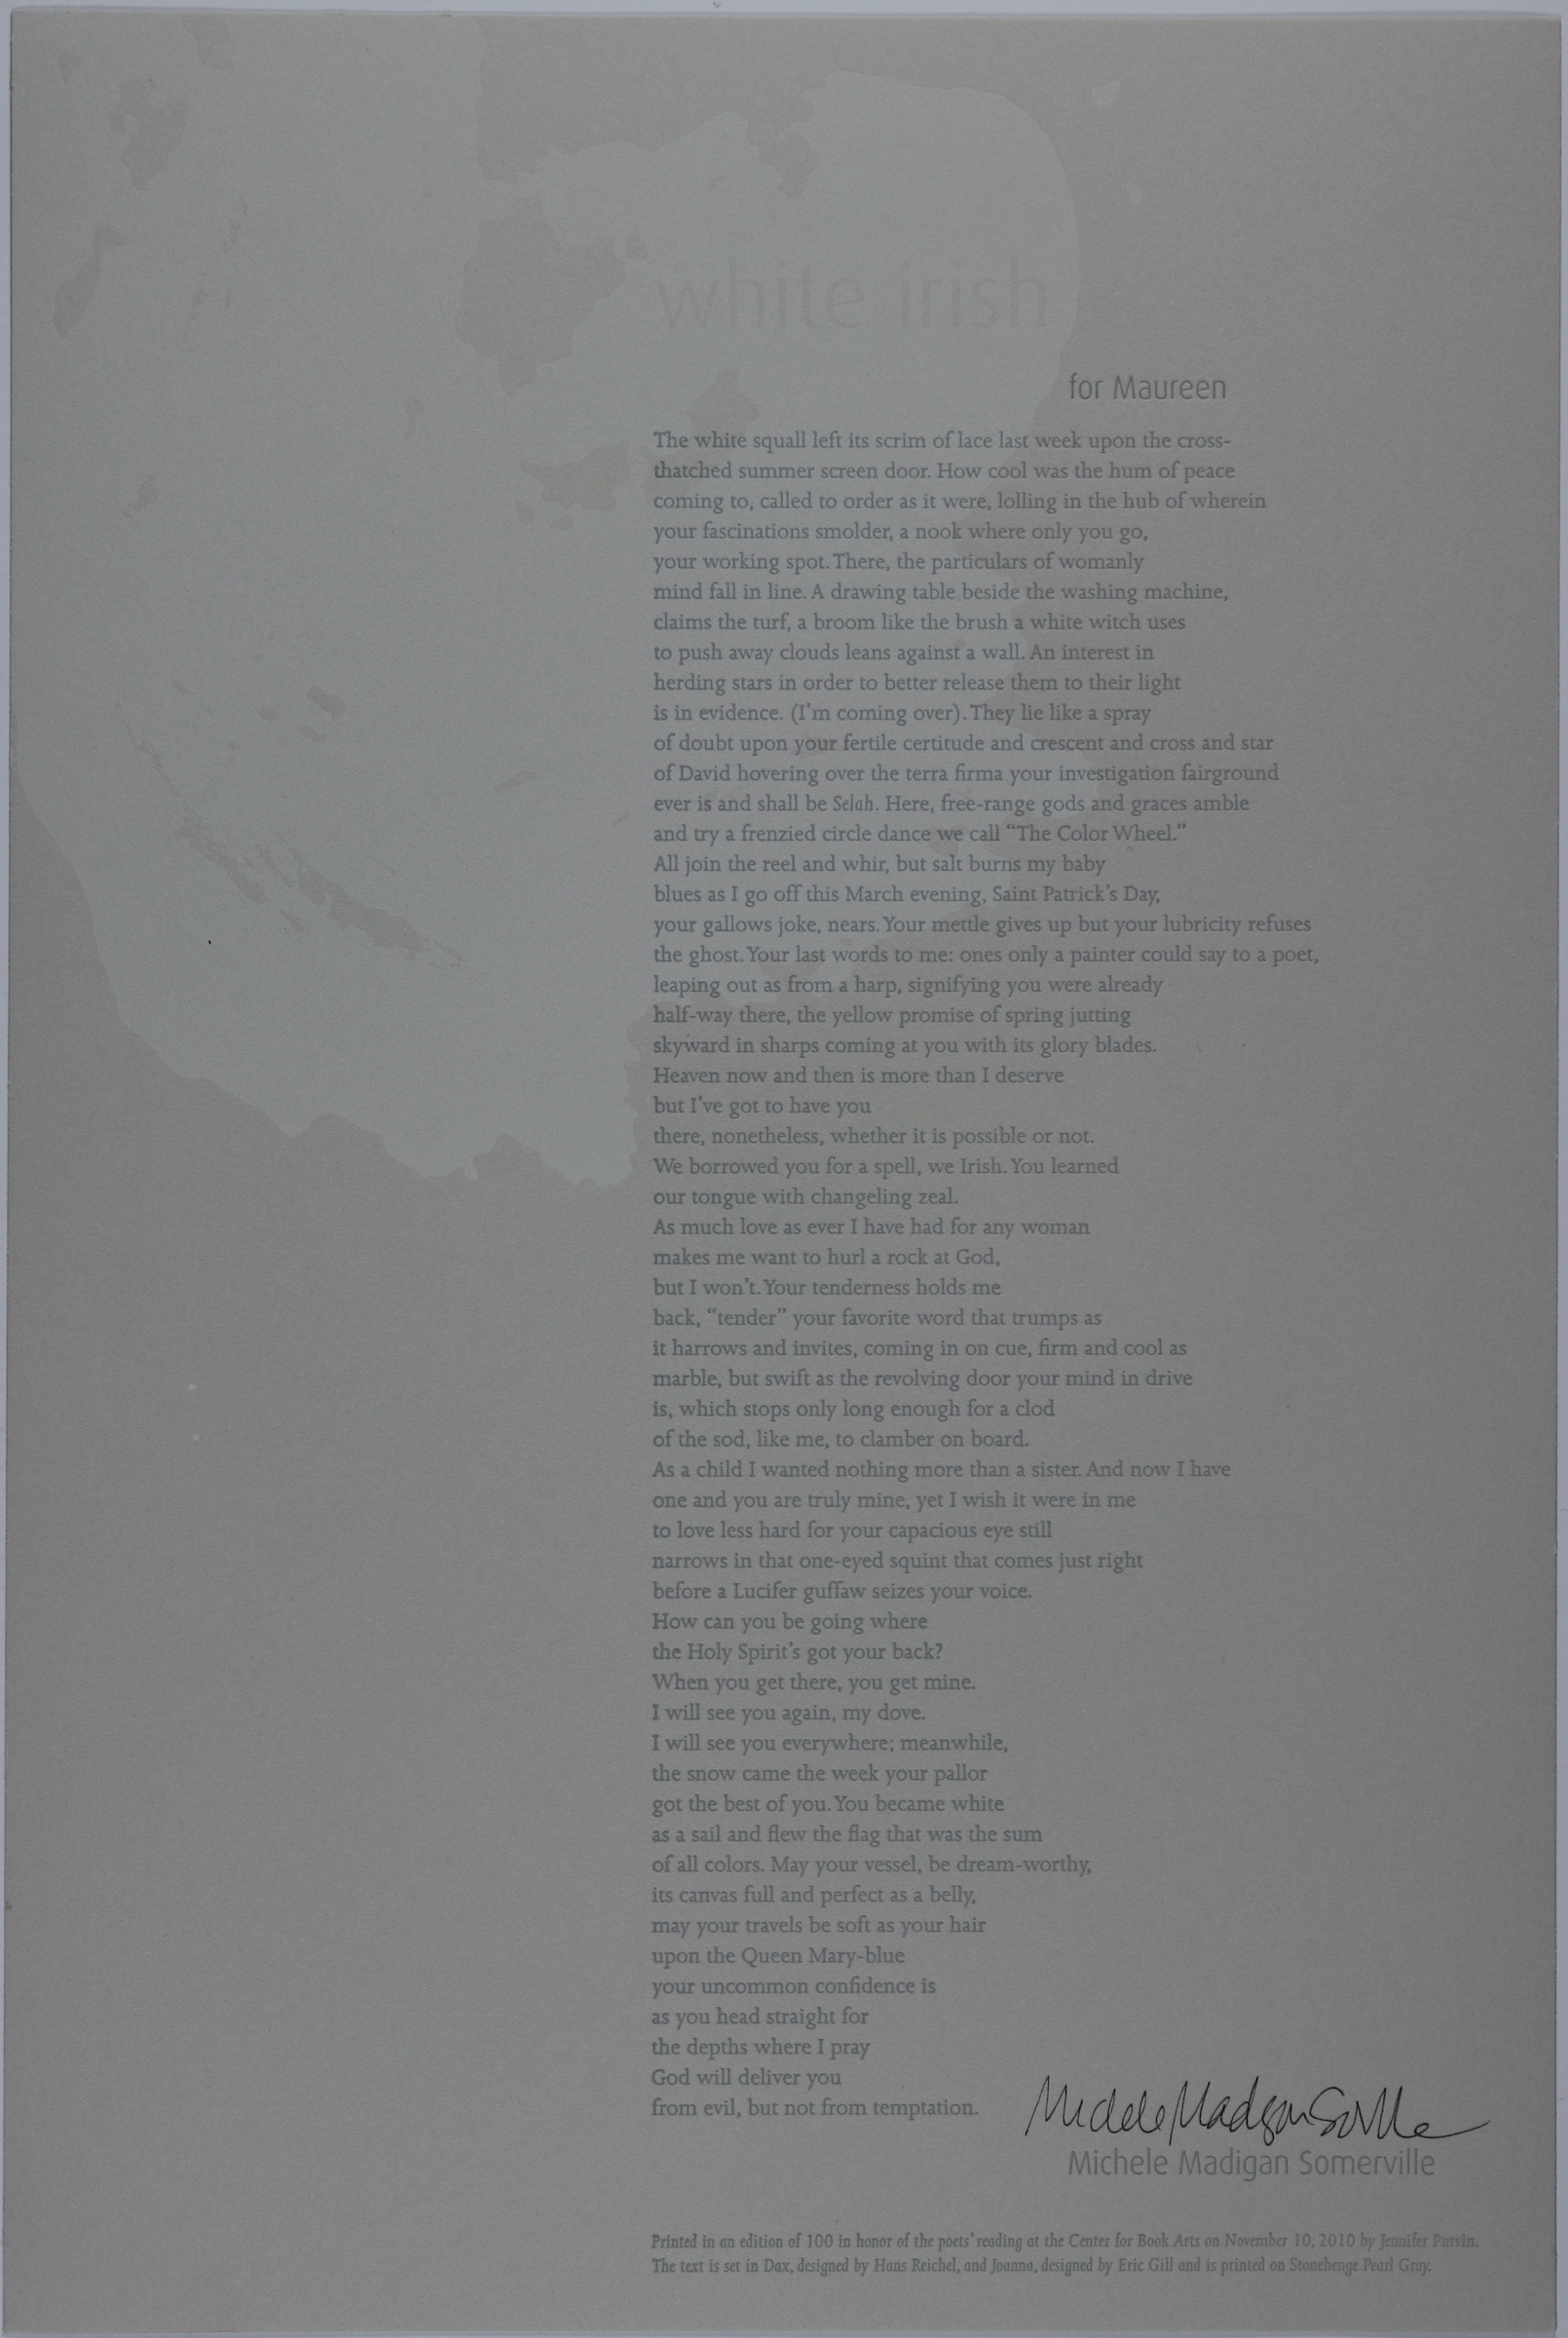 The broadside is long and rectangular in size, and consists of a light gray background, the text in a darker gray and smaller font, printed towards the right side of the broadside. The text is one long passage, going from the top to the bottom of the broadside. The background design is a white outline of Ireland, contrasted against the light gray. The title is printed against the image of the island, also in light gray.